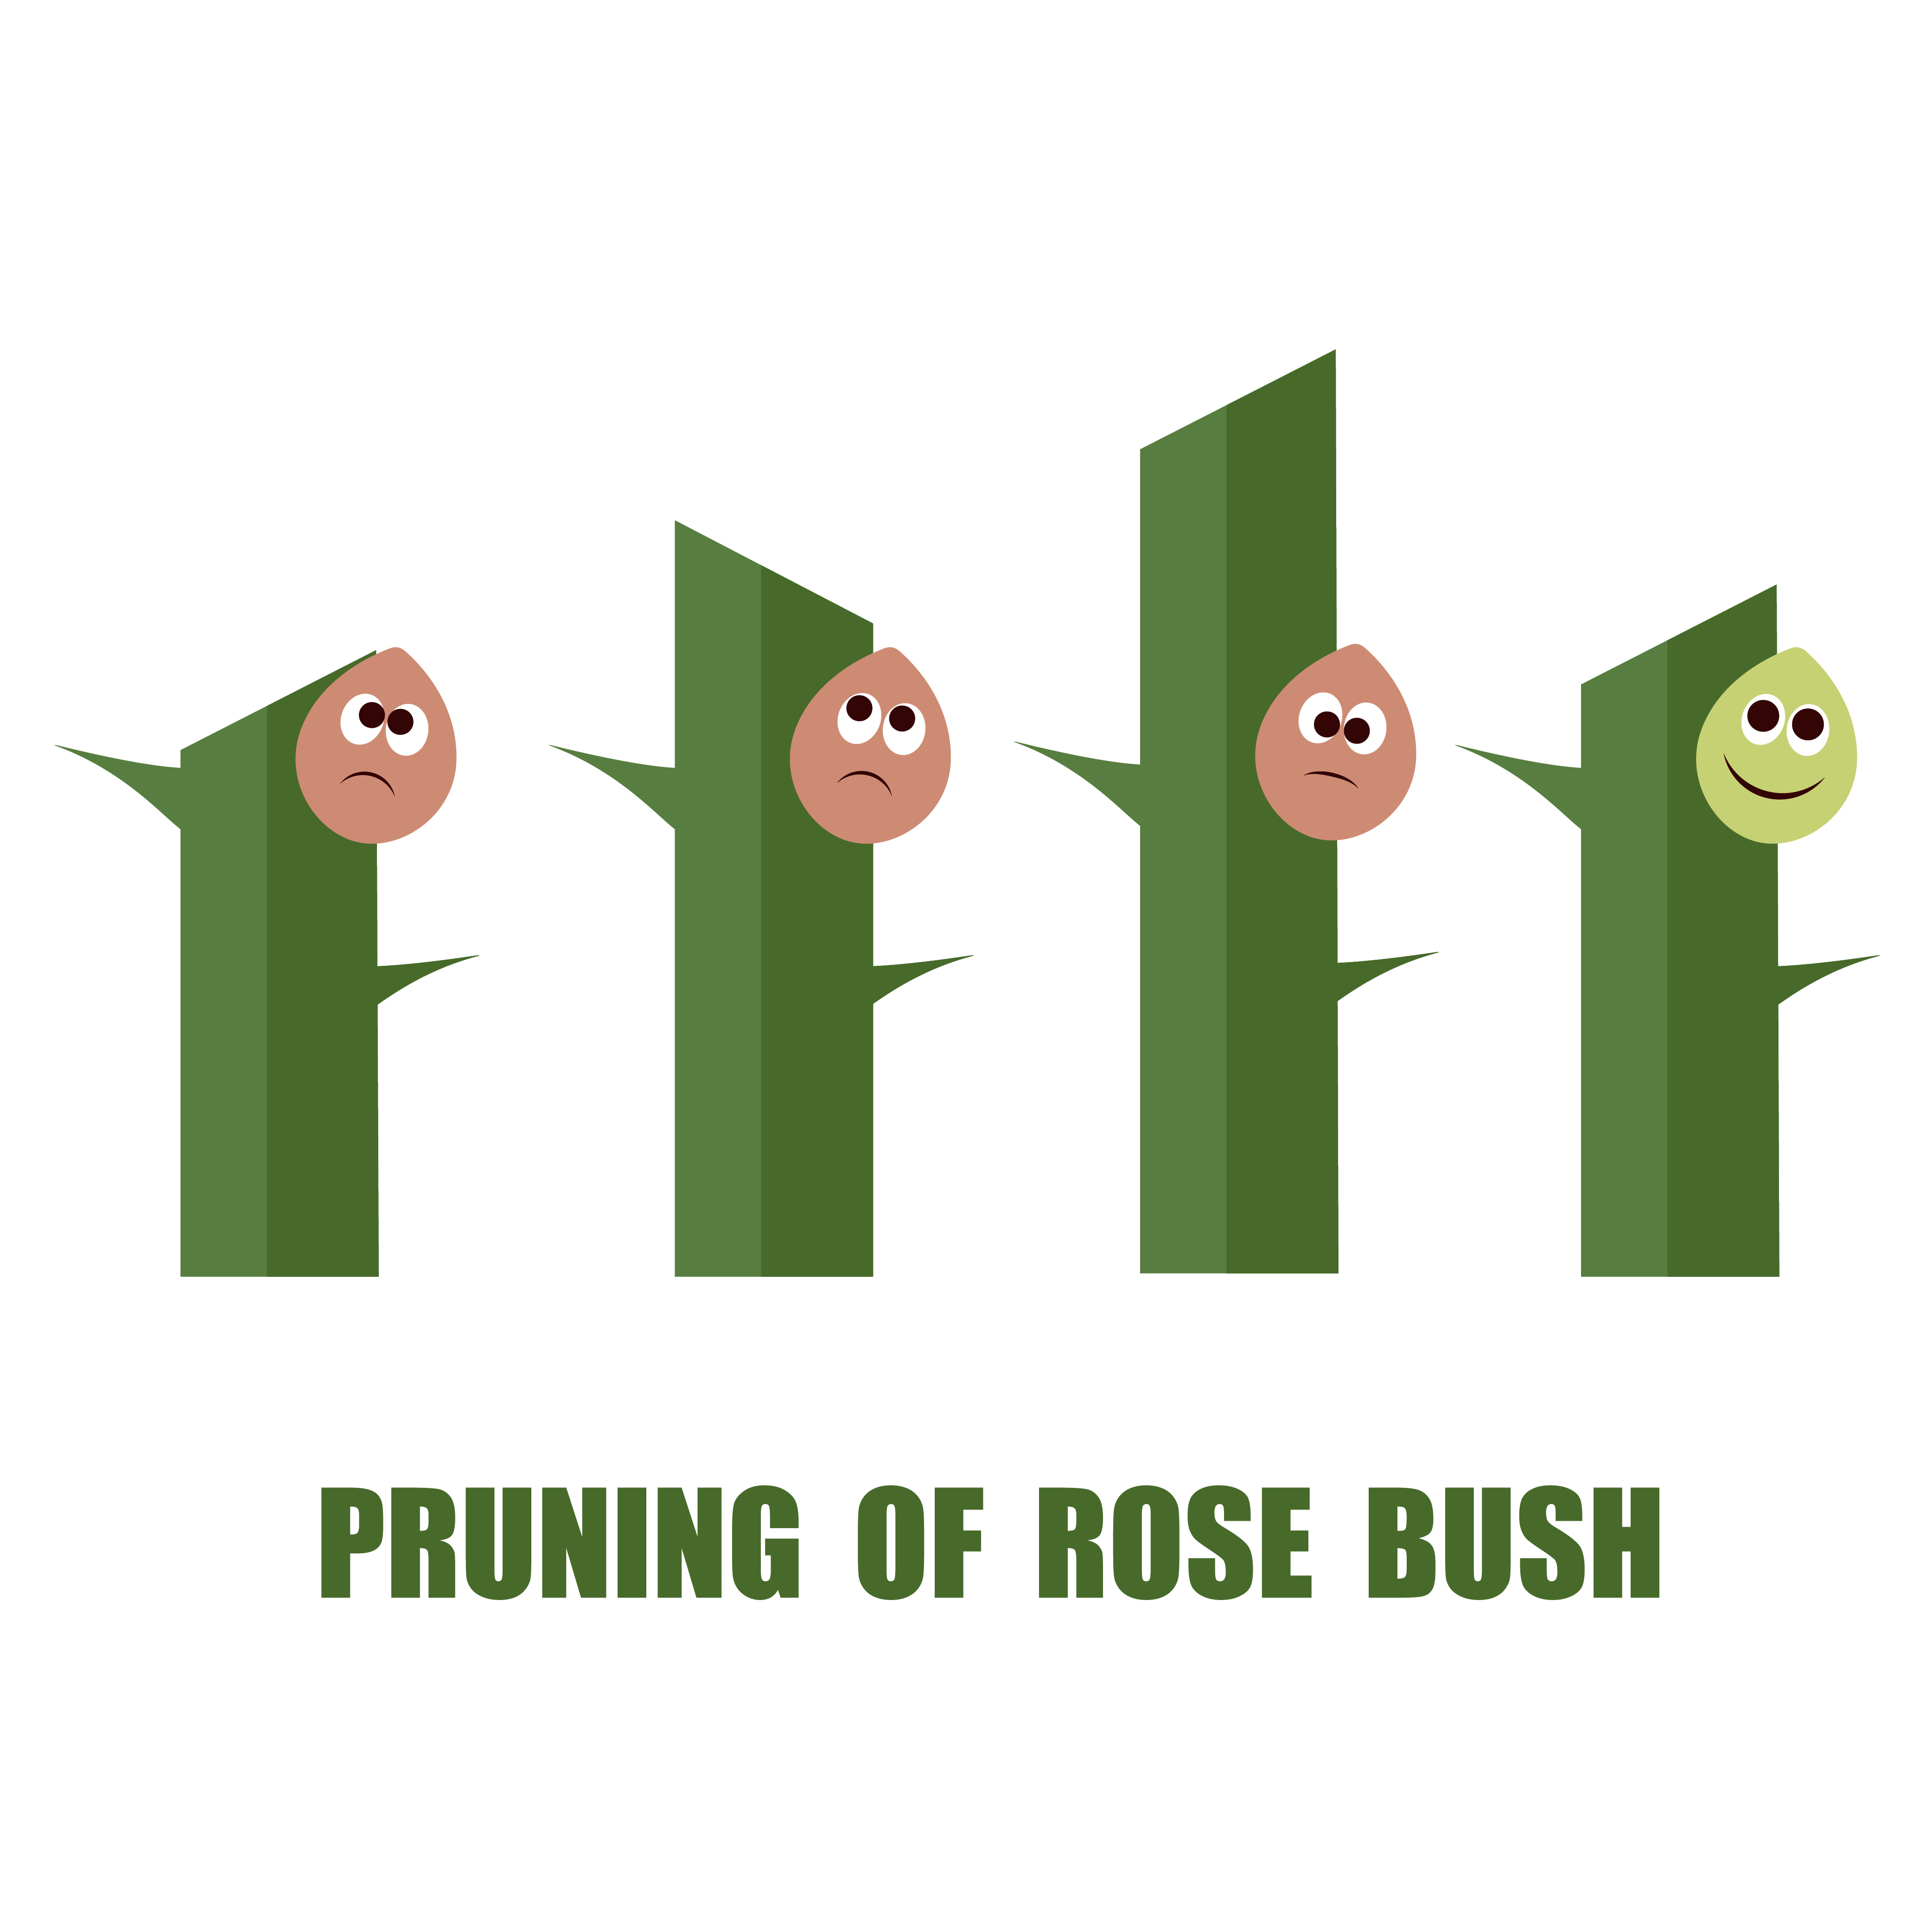 Correct and wrong ways to prune rose bushes